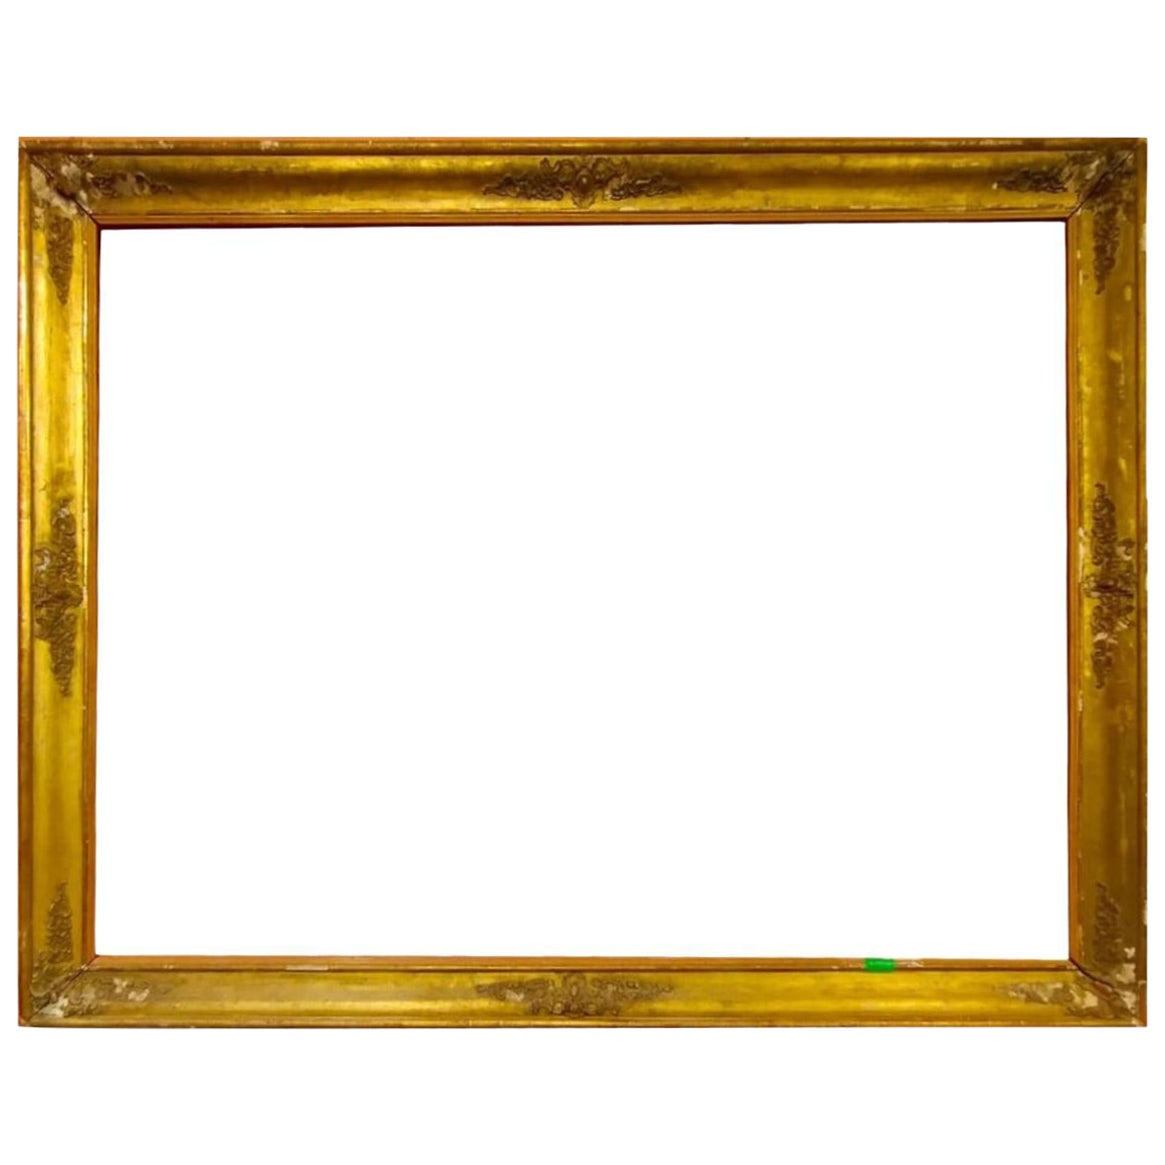 Large Gilded and Stucco-Decorated Frame from the 1800s For Sale